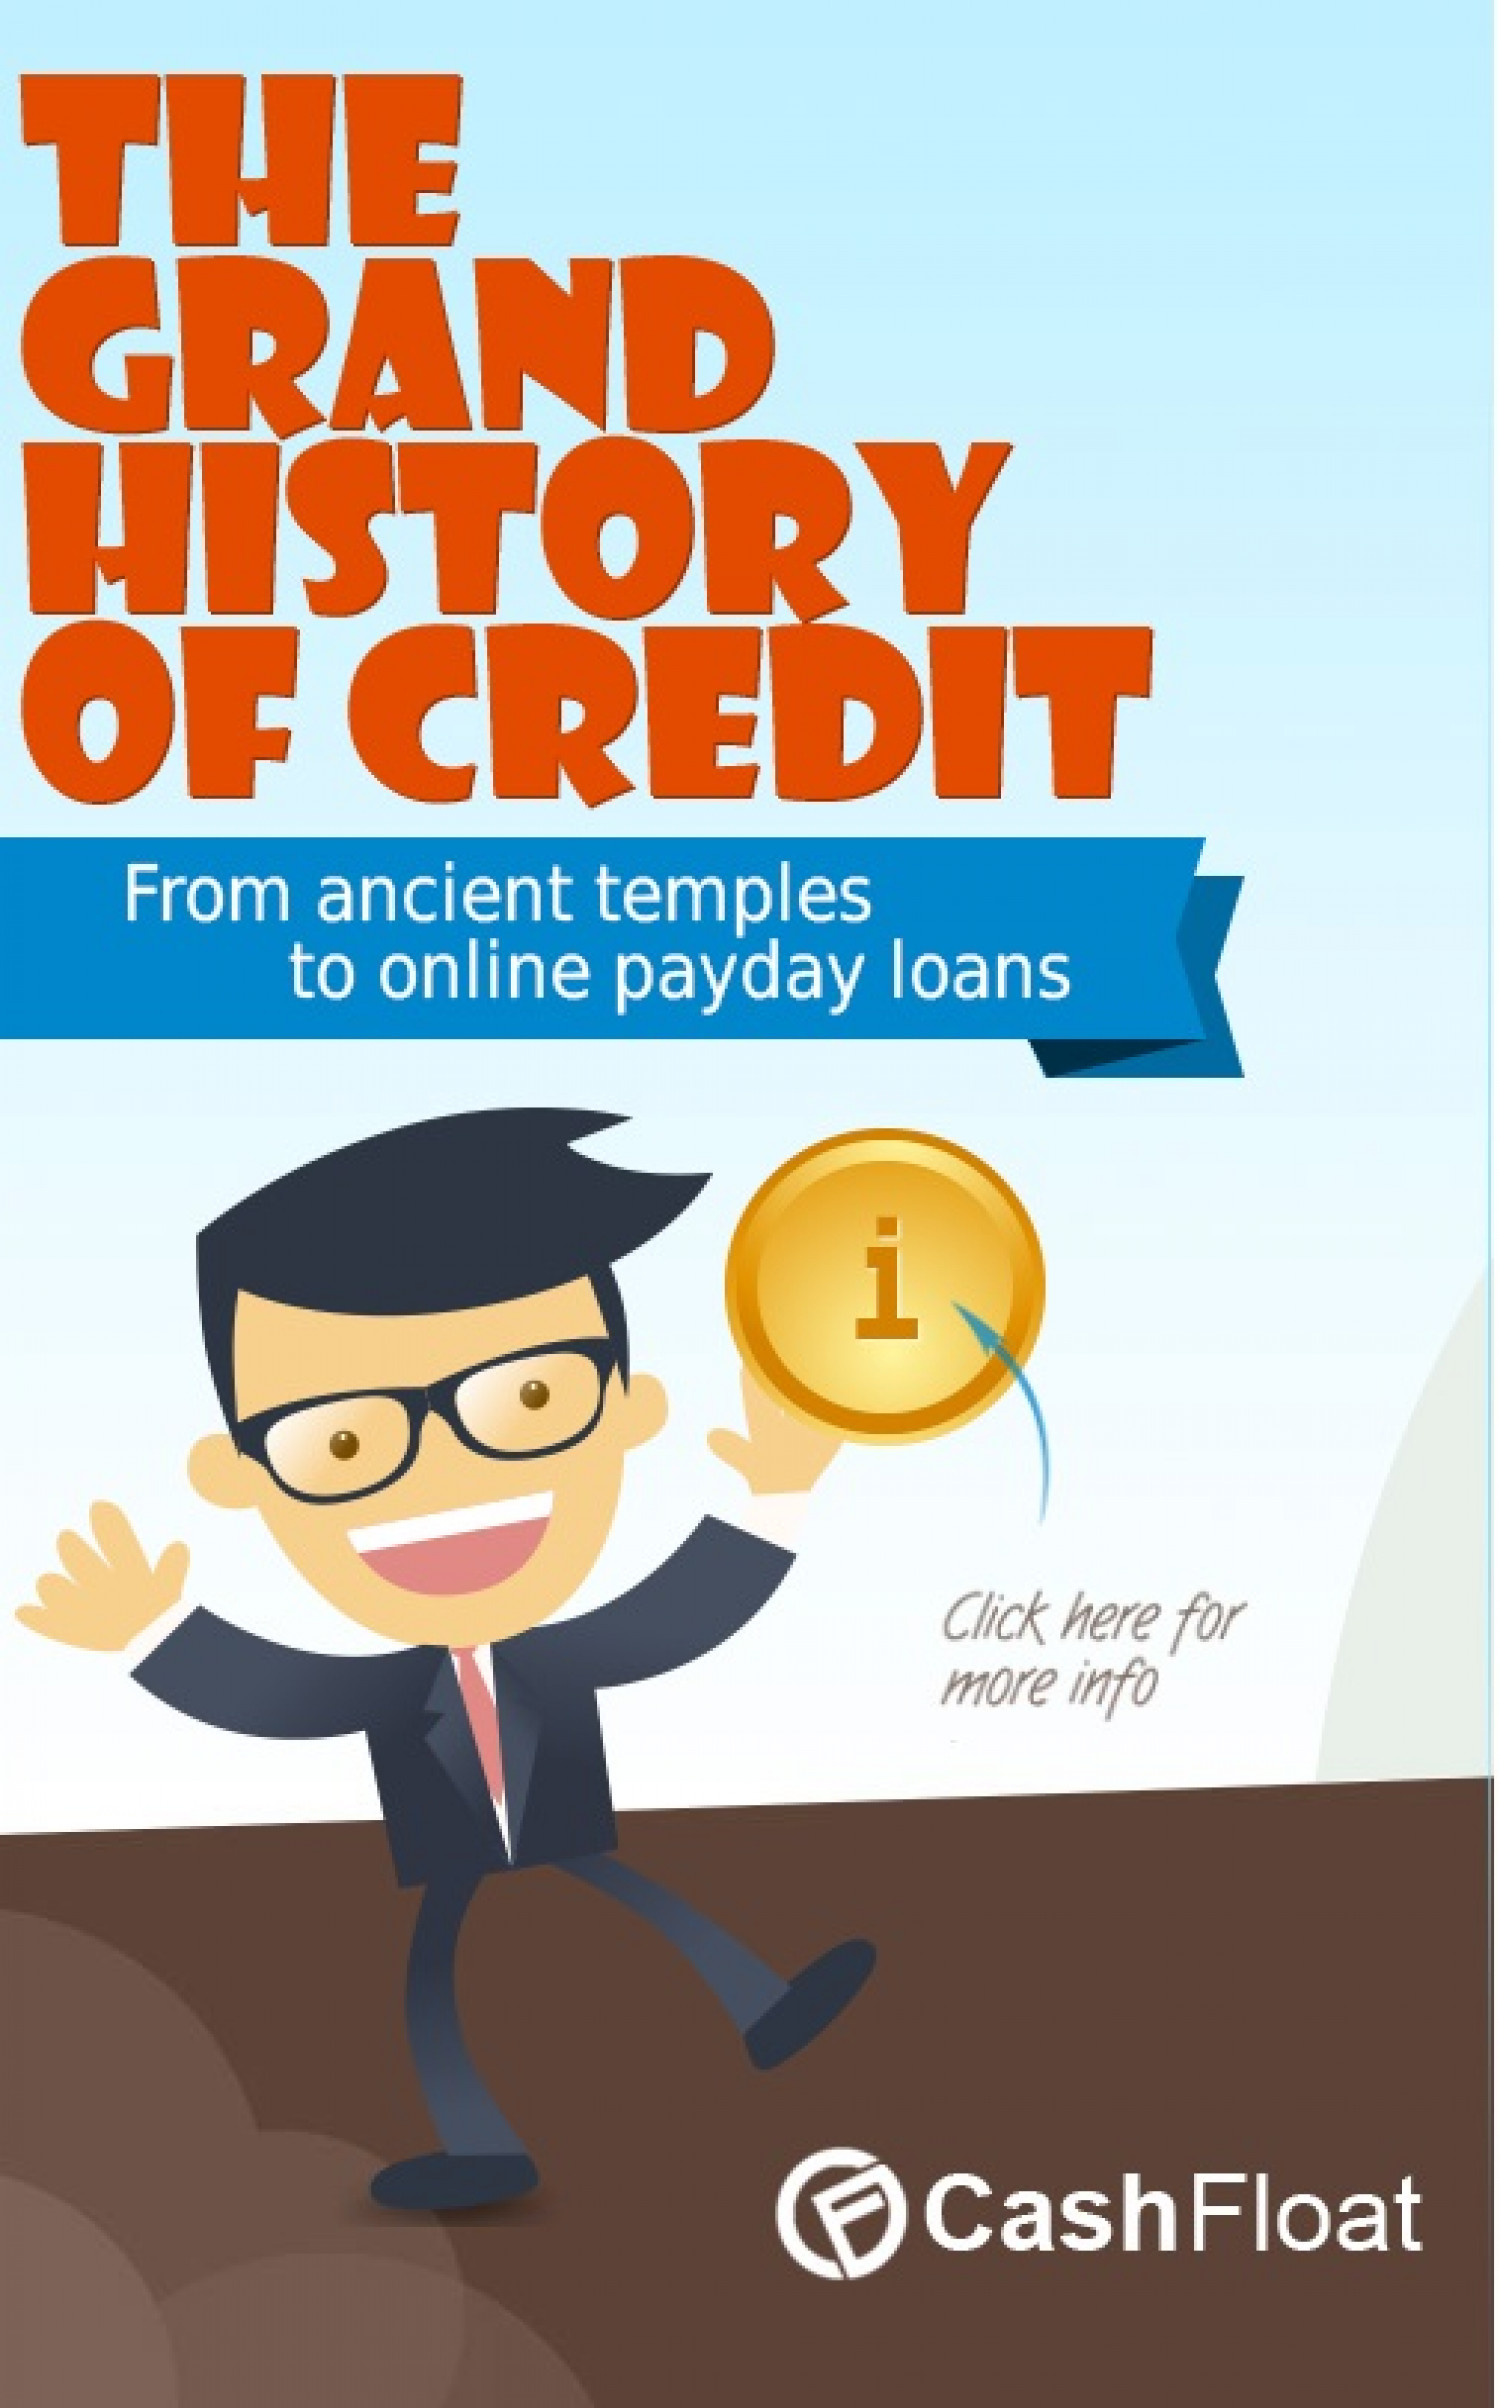 The Grand History of Credit Infographic